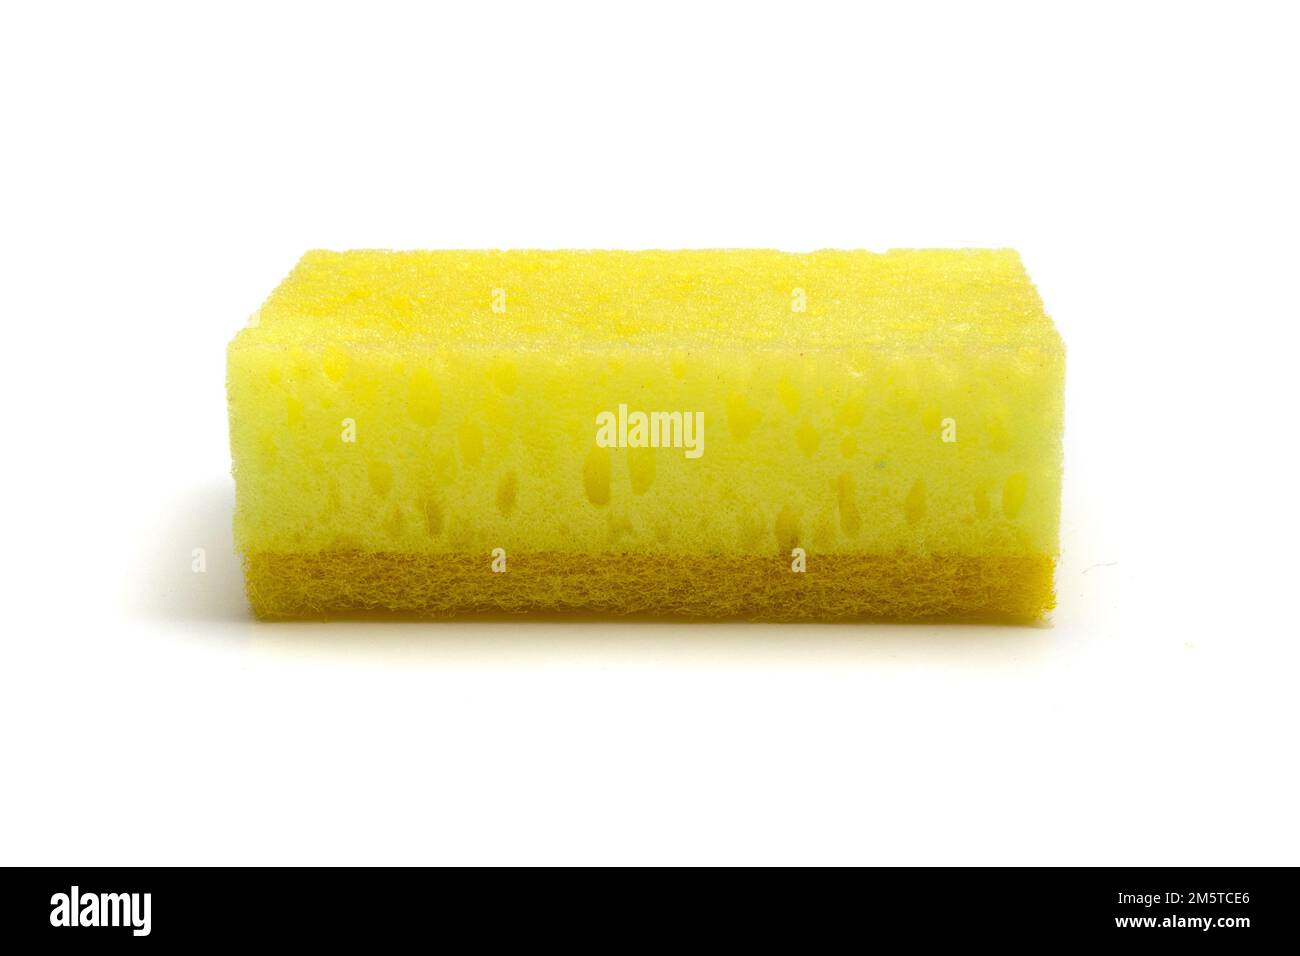 https://c8.alamy.com/comp/2M5TCE6/single-yellow-kitchen-sponge-isolated-on-white-background-closeup-side-view-2M5TCE6.jpg